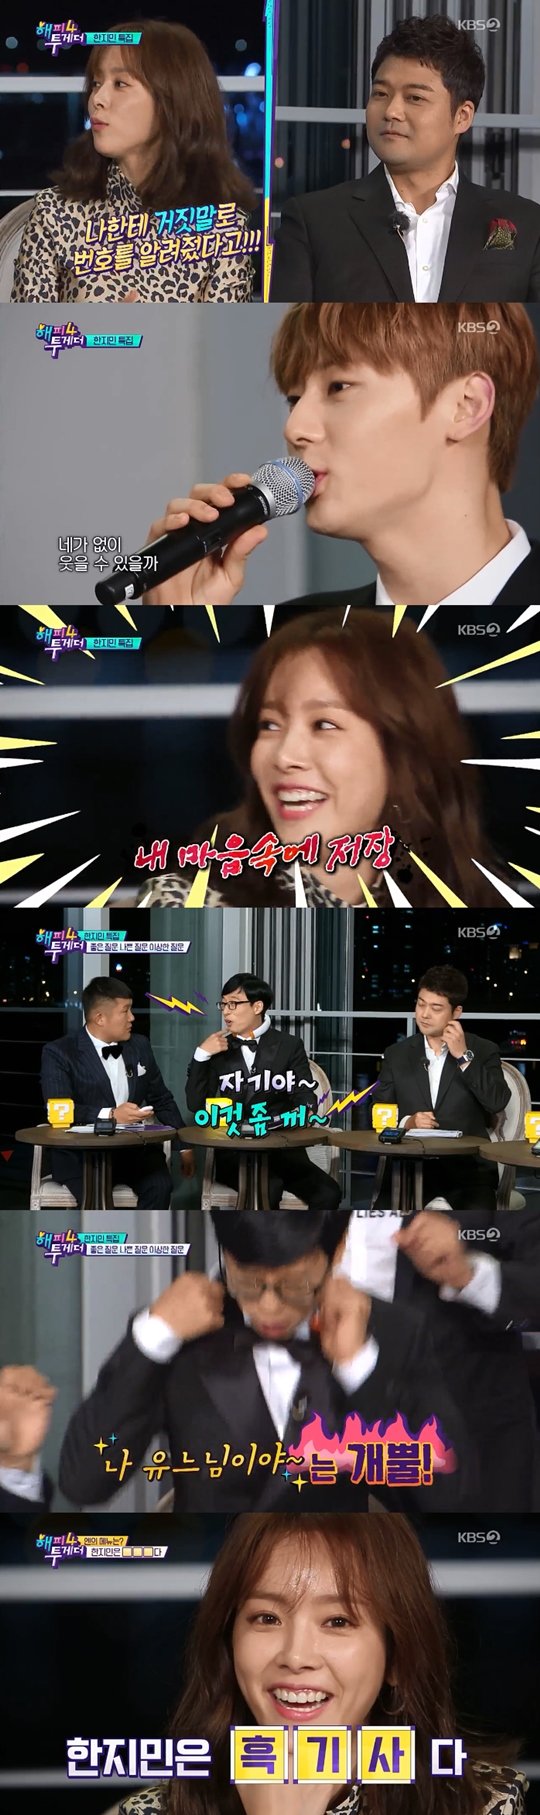 KBS 2TV Happy Together, which was first broadcast on the 11th, met actor Han Ji-min at the 23rd Busan International Film Festival.Season 4 also had a variety of corners, as did Season 3.The corner of Good Question Bad Question Strange Question is MC Yoo Jae-seok, Jun Hyun-moo, and Jo Se-ho each ask good questions, bad questions, strange questions, and Han Ji-min thinks it is fresh about this question, and otherwise NO recognition.MC who has been NO-approved gets low frequency Massage machine penaltyHan Ji-min gave a smile to the NO recognition and thought that he should not answer.Jun Hyun-moo and Jo Se-ho, who asked really bad and strange questions, showed that they did not play well with a stone fastball.The MCs who were hit by the low frequency massage machine pressed the raw laughing point.The next corner was a format that transformed the night kiosk, which was a popular corner of Hatu 3 as a friend restaurant.Girls Day Hyeri, Biggs En, and Park Hyung-sik, who are close to Han Ji-min, recommended food they want to give Han Ji-min.Only by correcting problems related to Han Ji-min could they be eaten; the last corner was the Click Click Challenge, which allowed donations according to video views.Han Ji-mins brilliant video call performance gave a smile. Wanna One Hwang Min-hyun, who appeared as a special MC, also showed off his performance.In Season 3, he was reorganized in about 11 years with Season 4.Season 4 has the same big frame as a talk show, but in Season 3, it is different that many guest is invited to the studio and Season 4 is to the scene where the guest is located. In order to emphasize that it is Busan, all the talk was done indoors and the place was not meaningful.And the MC and the guest didnt seem to understand the new corner, so the progress was set and there was no tension.Viewers said, guest was good, but it was too boring, I do not know why I reorganized, and format is sick.The broadcast ratings were 3.0 percent (Nilson Korea, based on national households), lower than the last episode of Happy Together (3.8%).